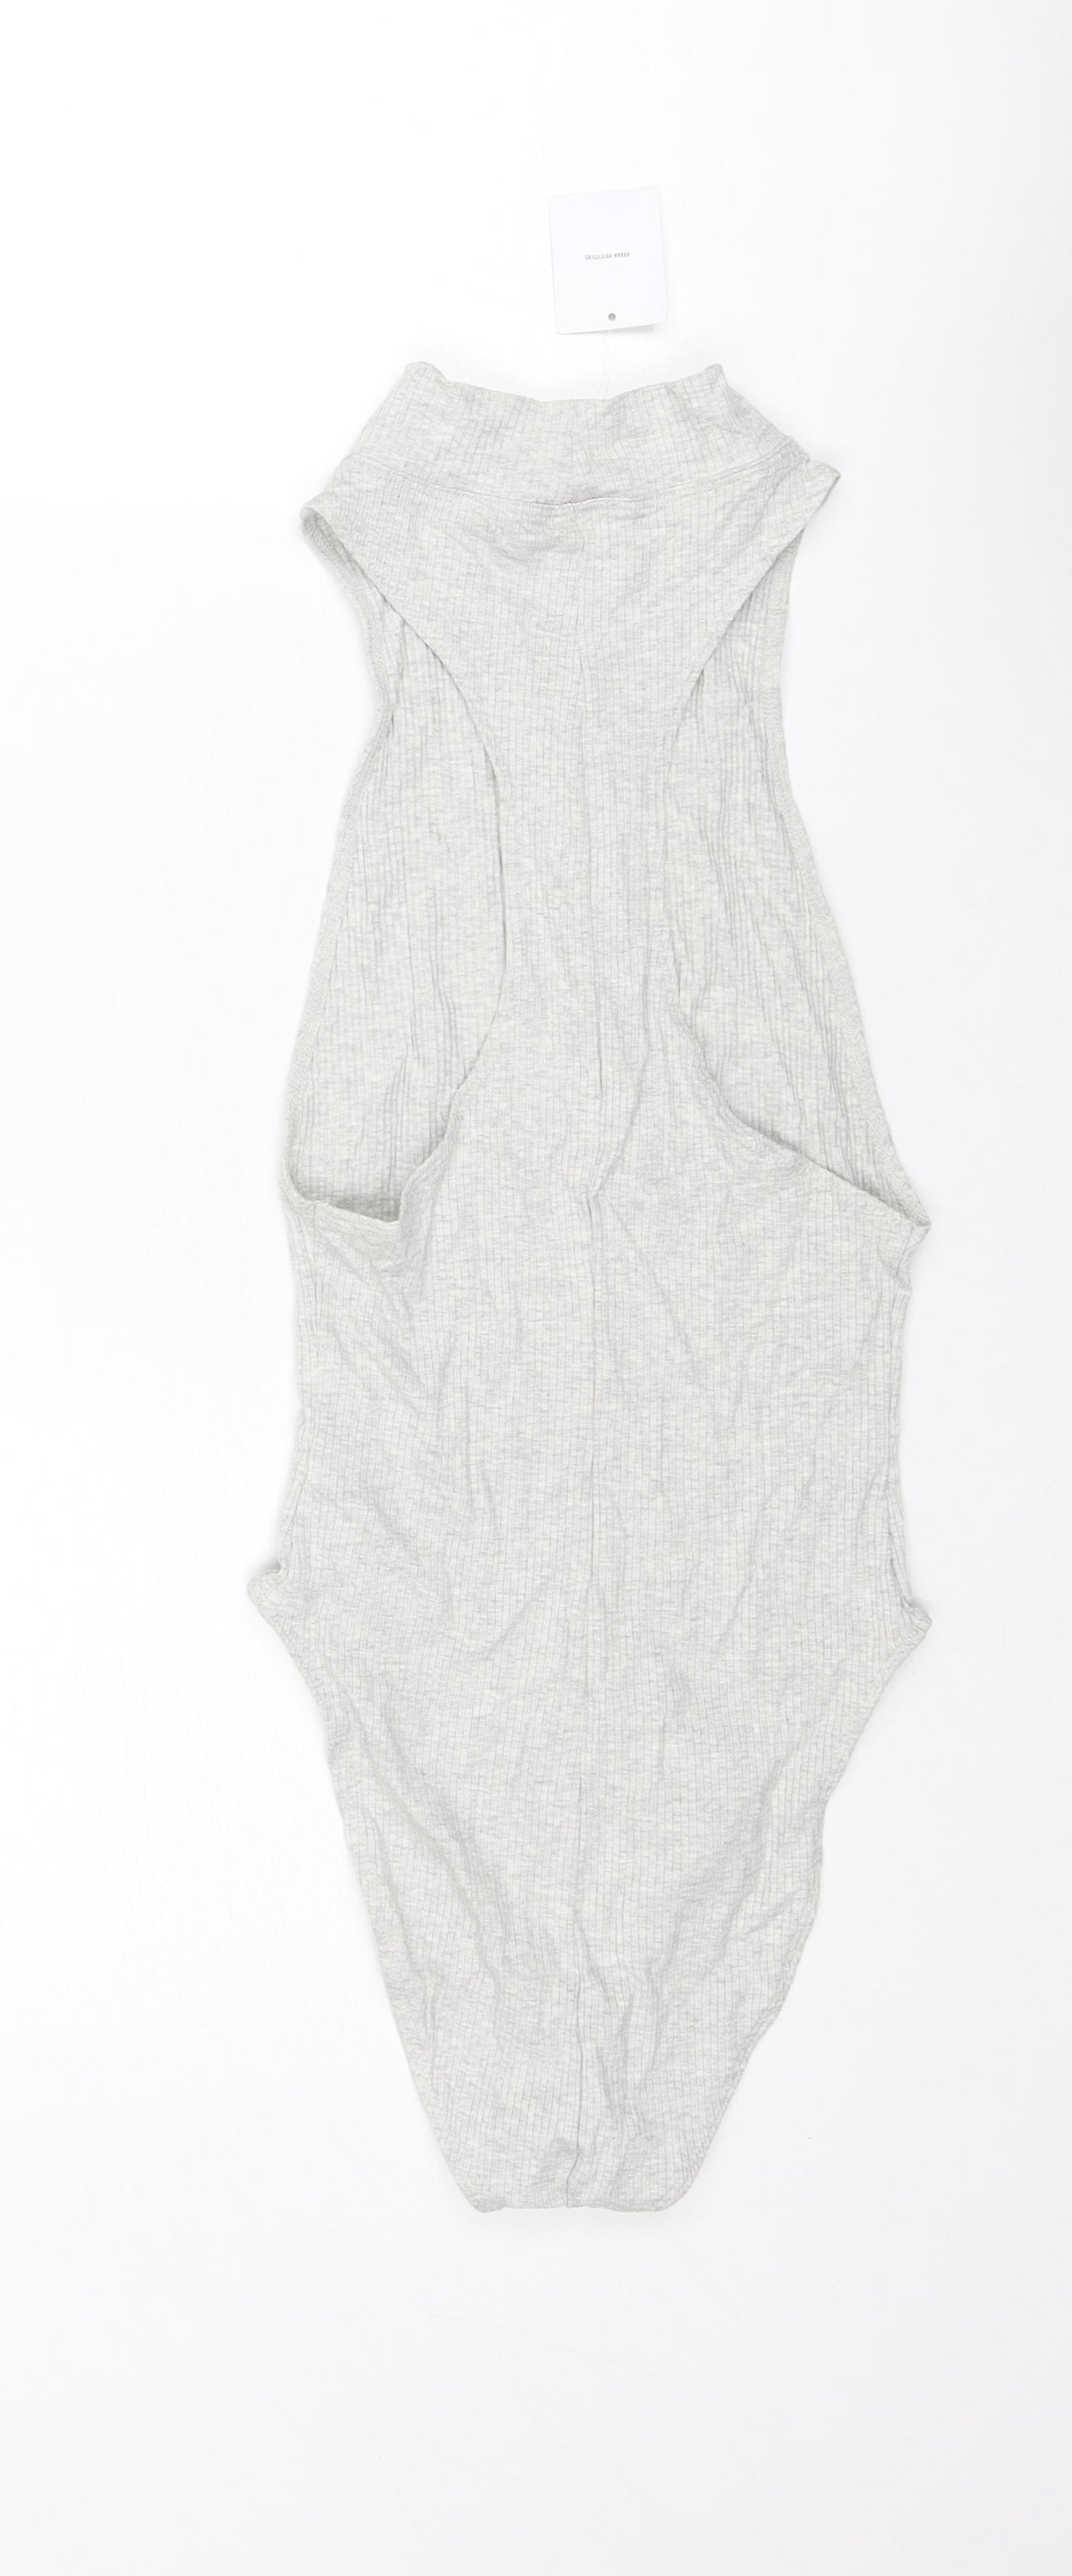 Urban Outfitters Womens Grey Cotton Bodysuit One-Piece Size XS Zip